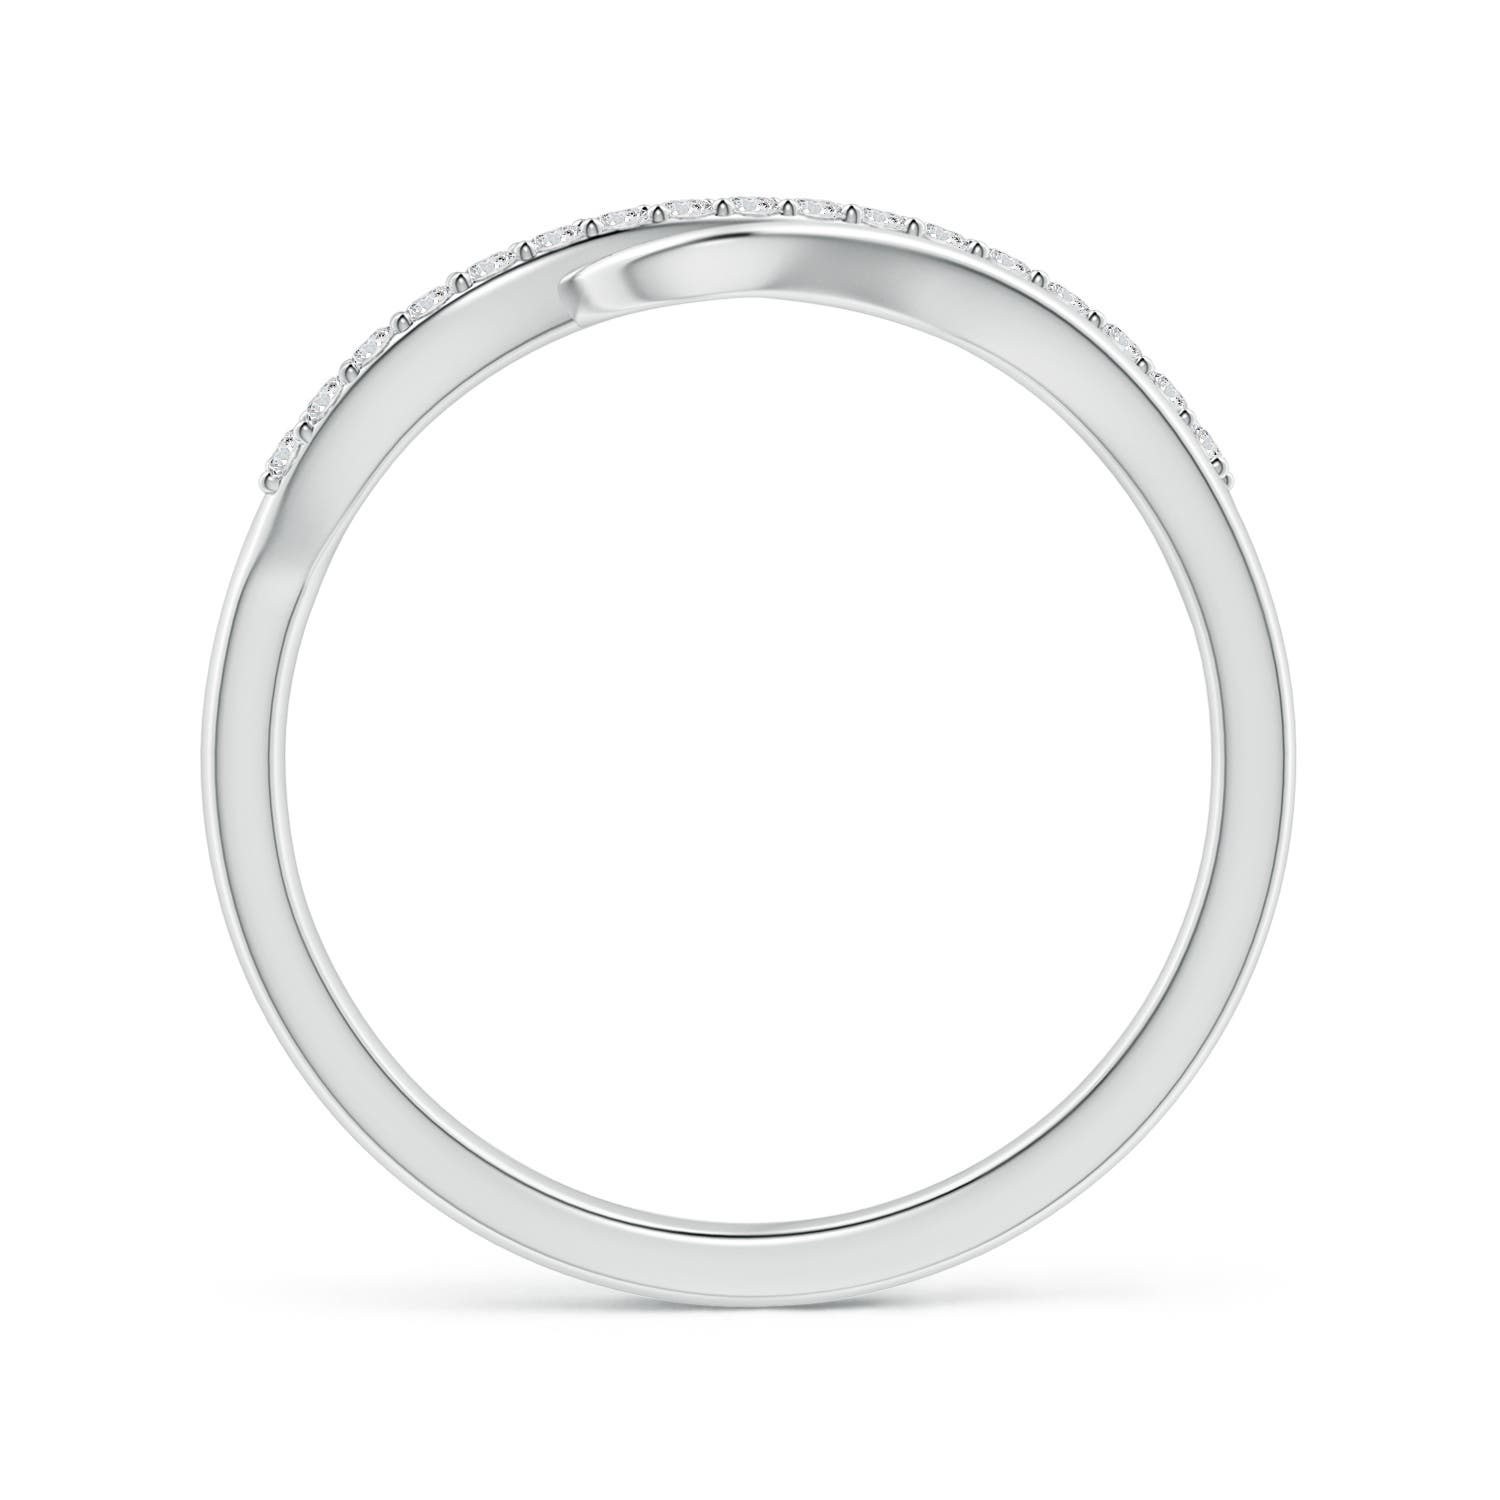 H, SI2 / 0.17 CT / 14 KT White Gold